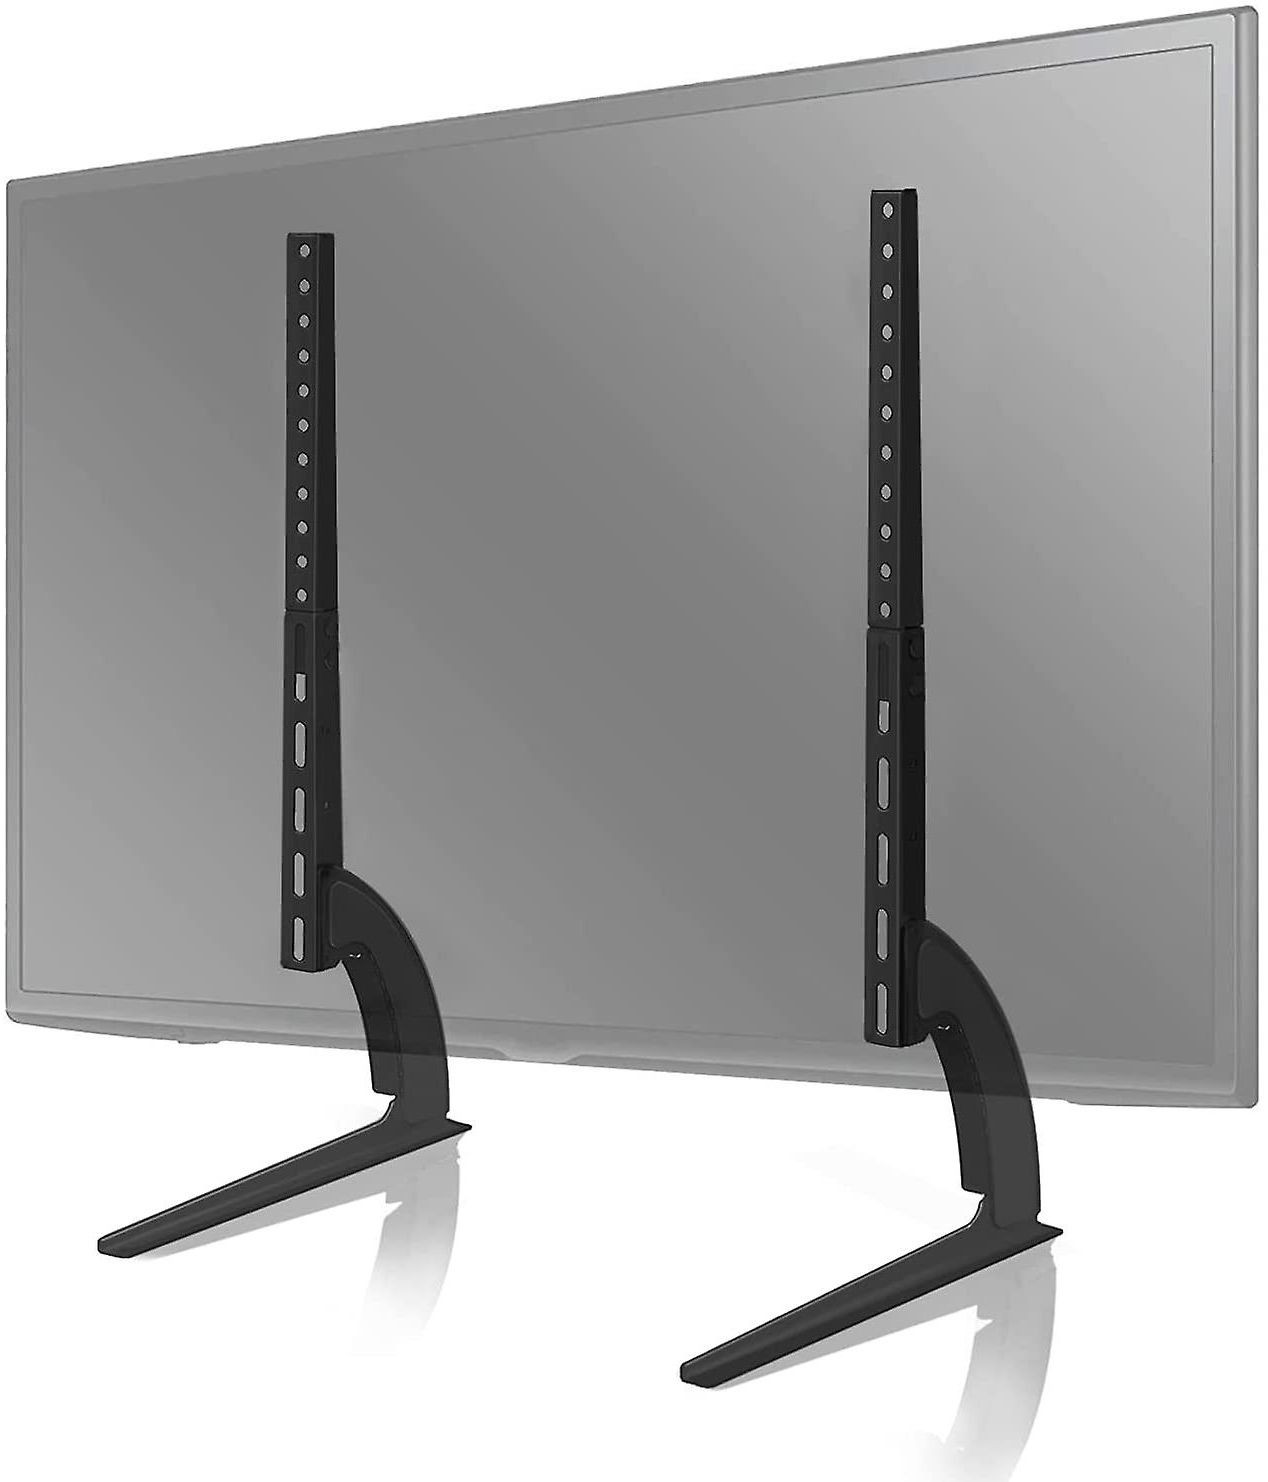 27 65 Inch Tvstavr Universal Table Top Tv Stand For Most 27 30 32 37 40 42  47 50 55 60 65 Inch Plasma Lcd Led Flat Or Curved Screen Tvs With Height Ad  | Fruugo It Inside Universal Tabletop Tv Stands (Gallery 1 of 20)